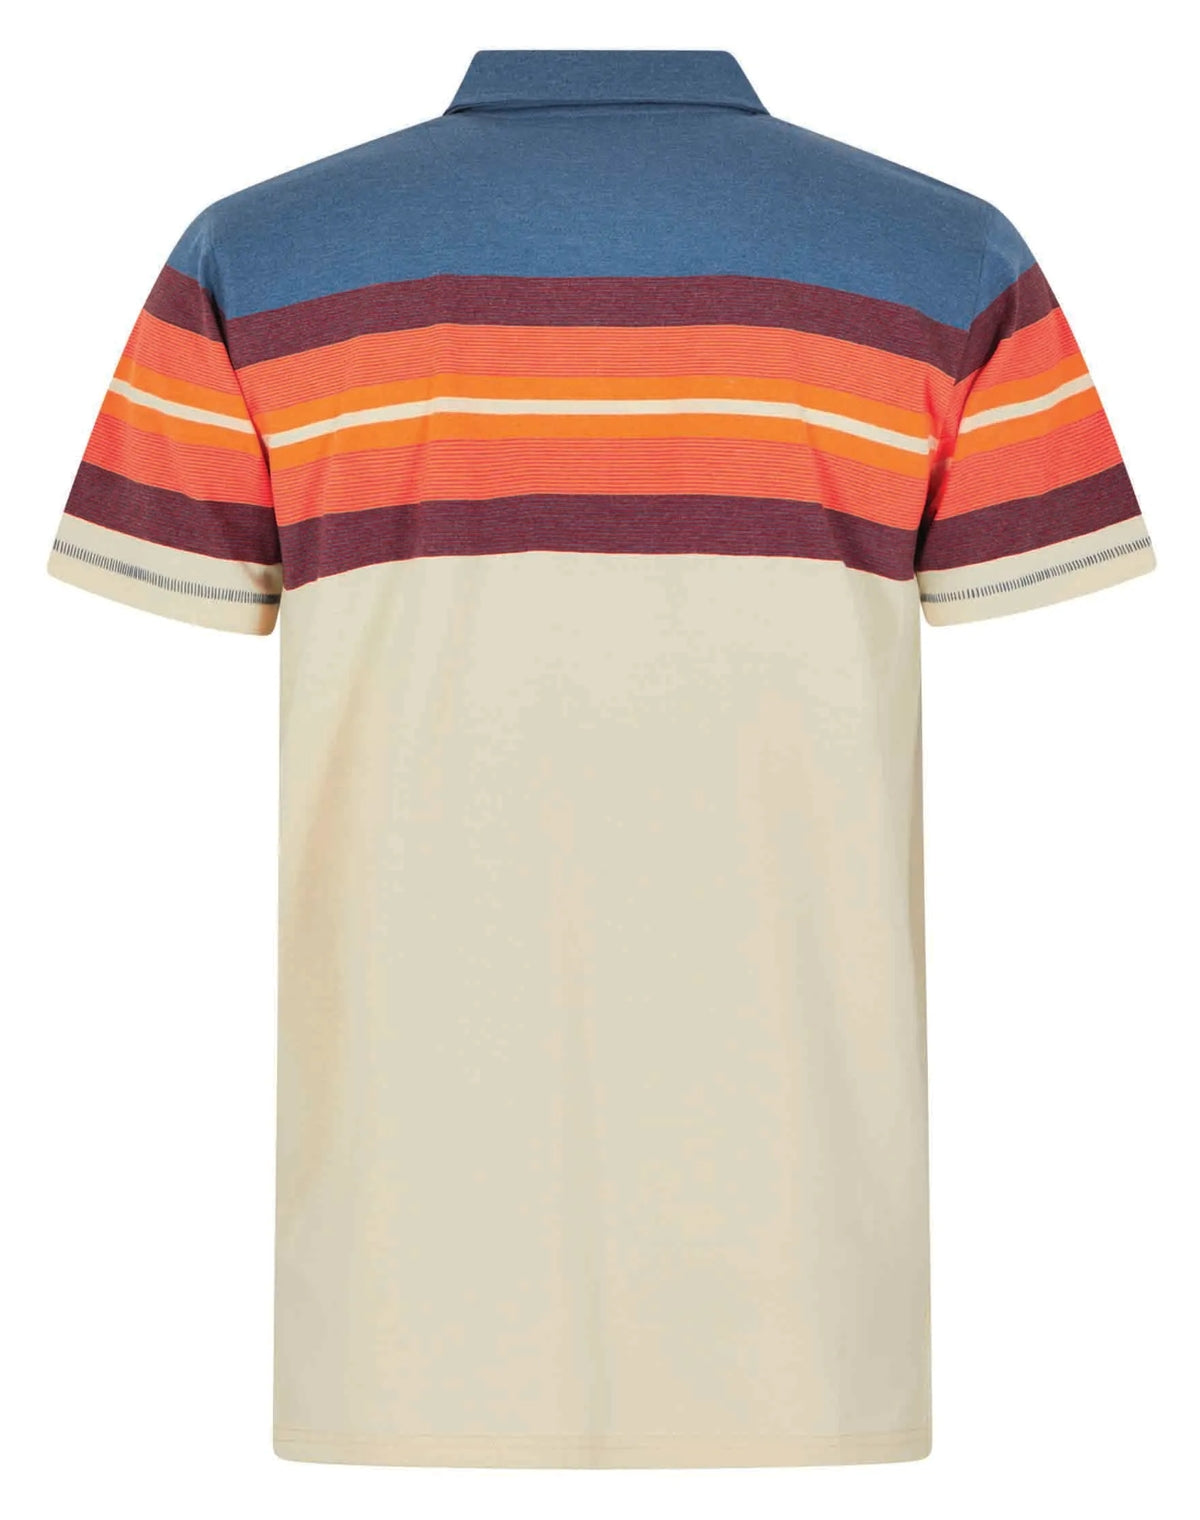 Men's chest stripe polo shirt from Weird Fish in Radical Red.